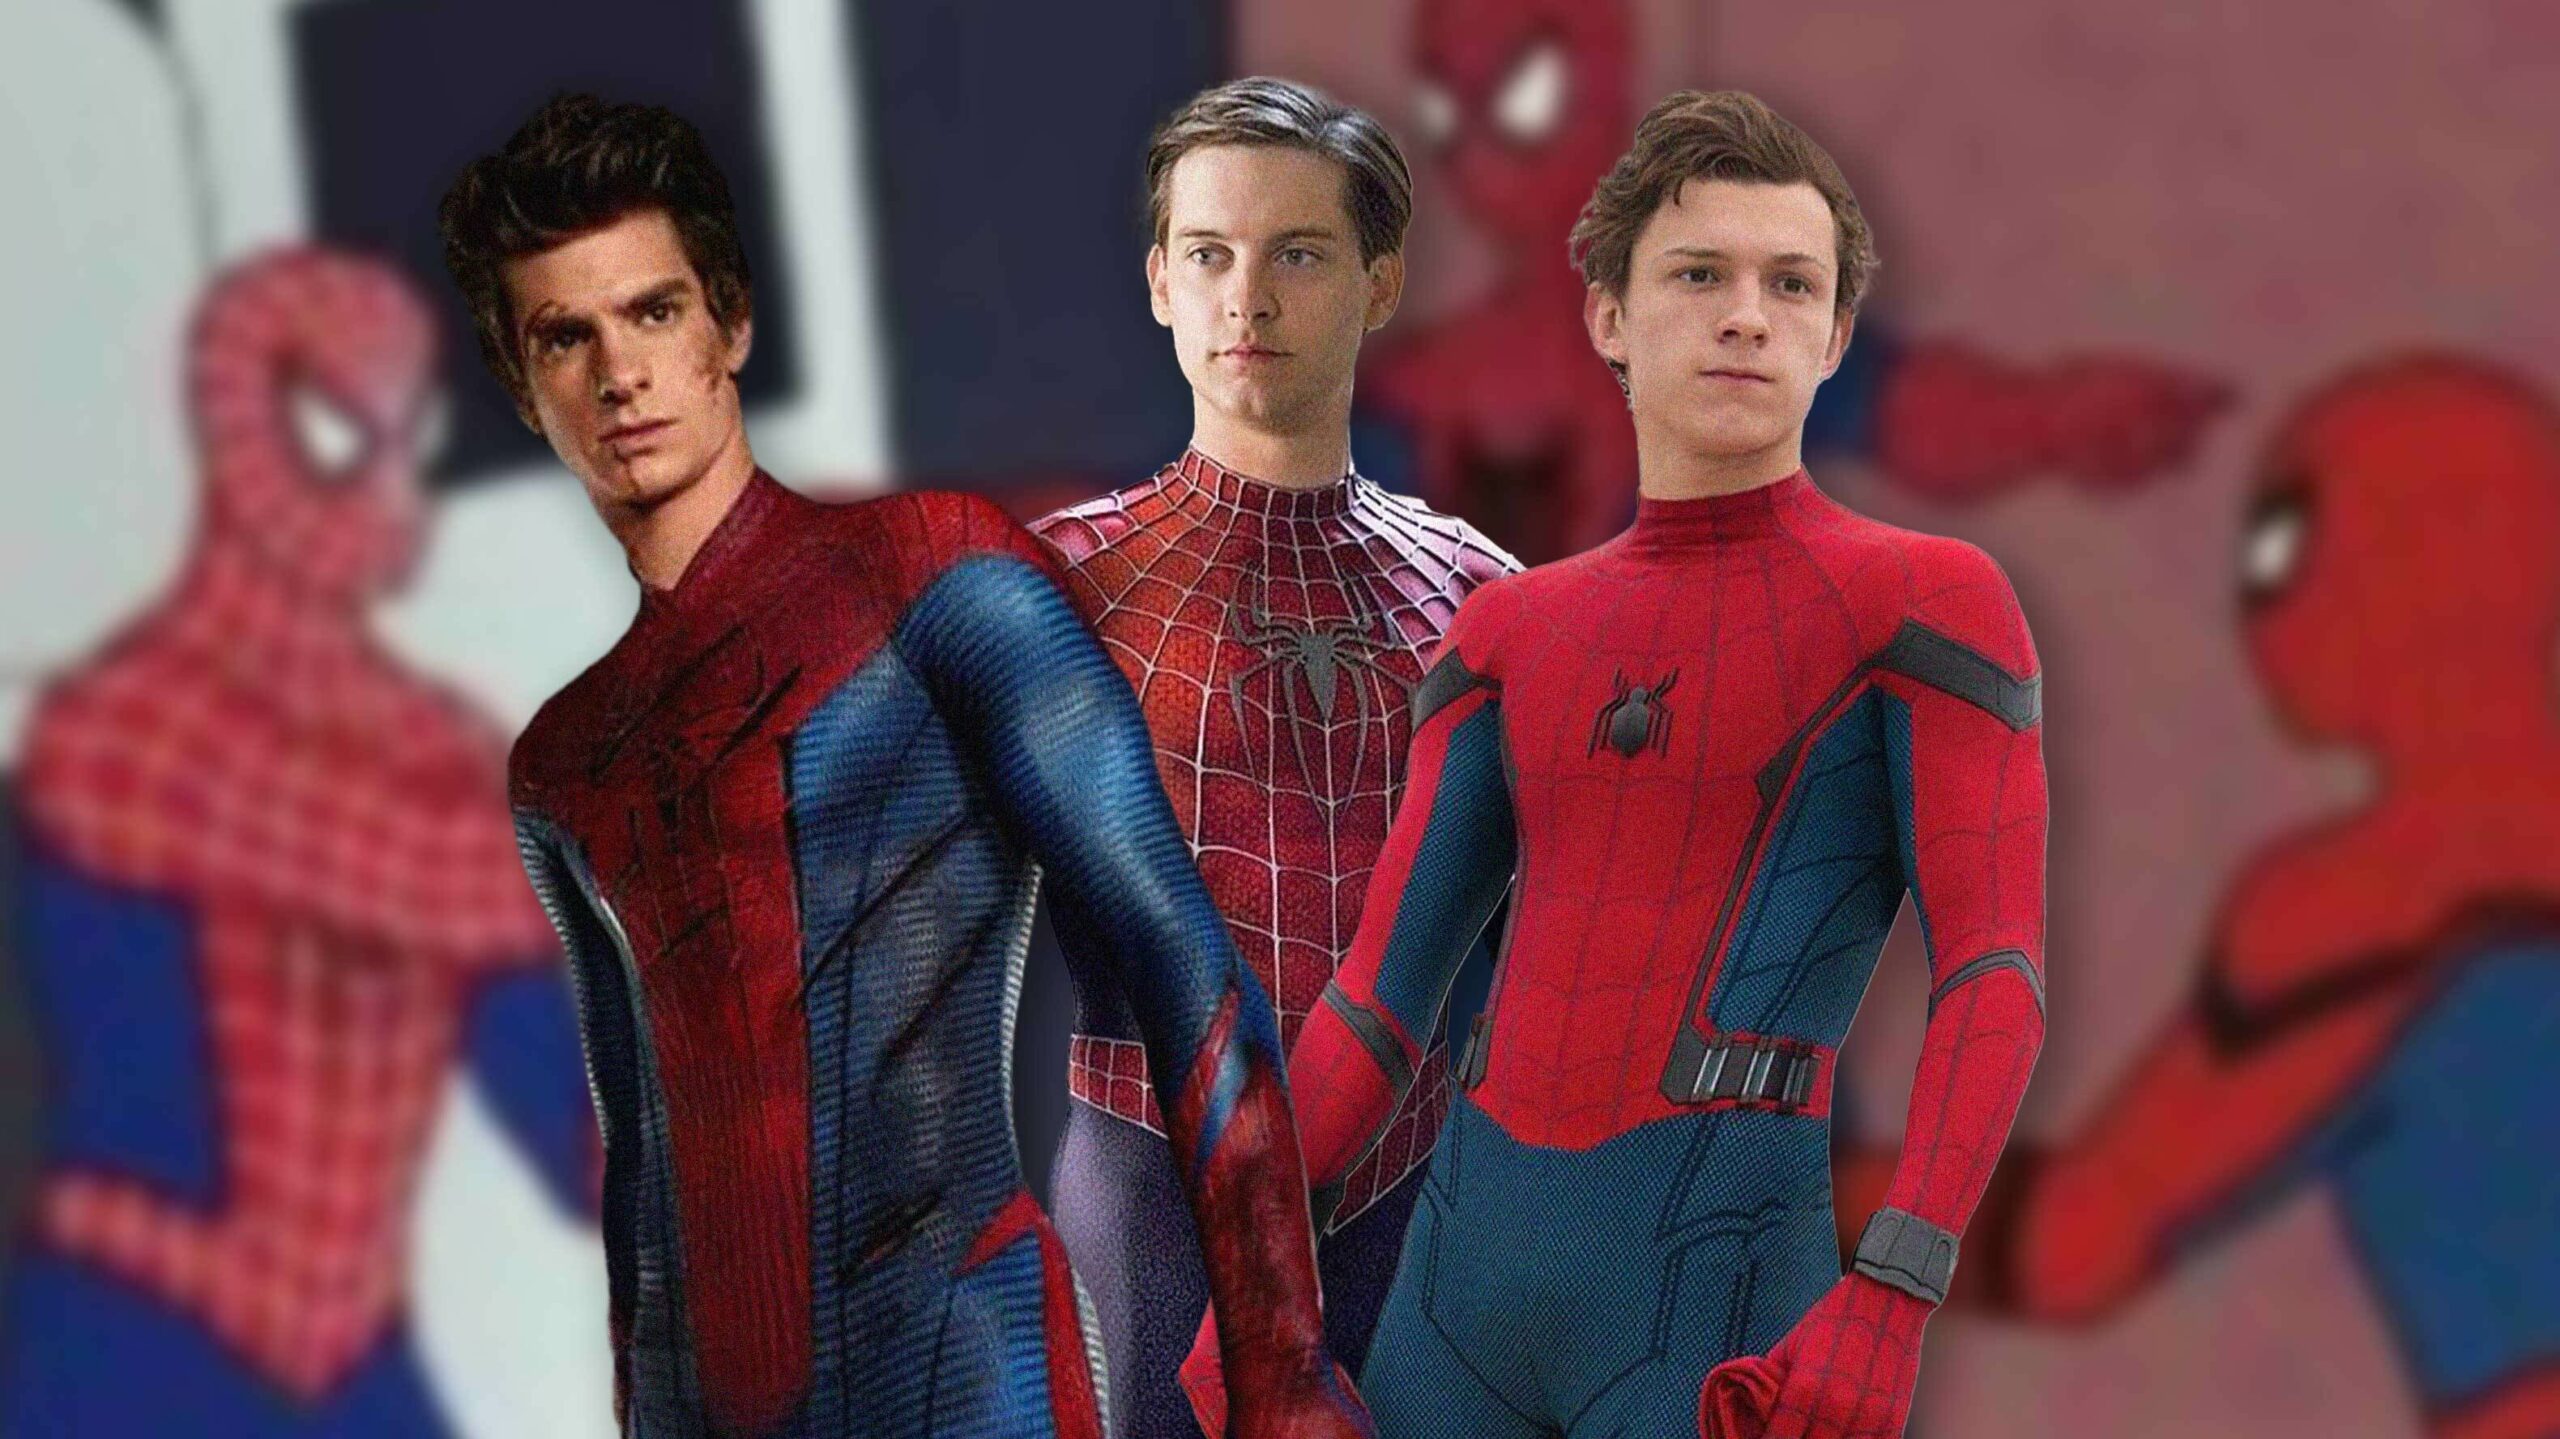 Tobey Maguire, Andrew Garfield and Tom Holland's Spider-Men